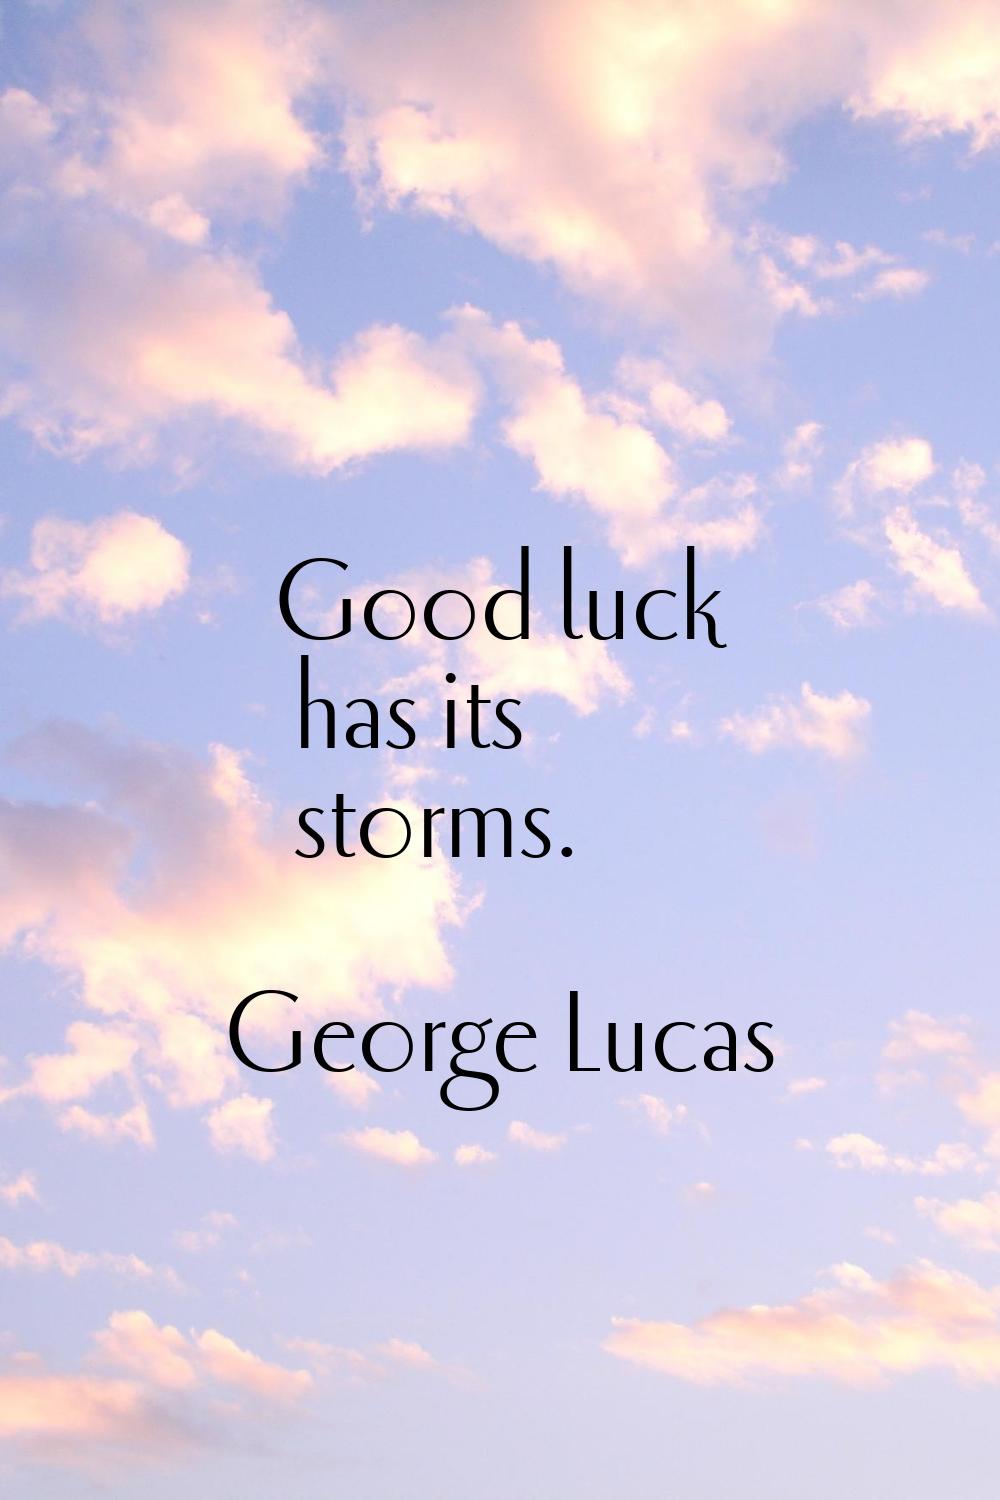 Good luck has its storms.